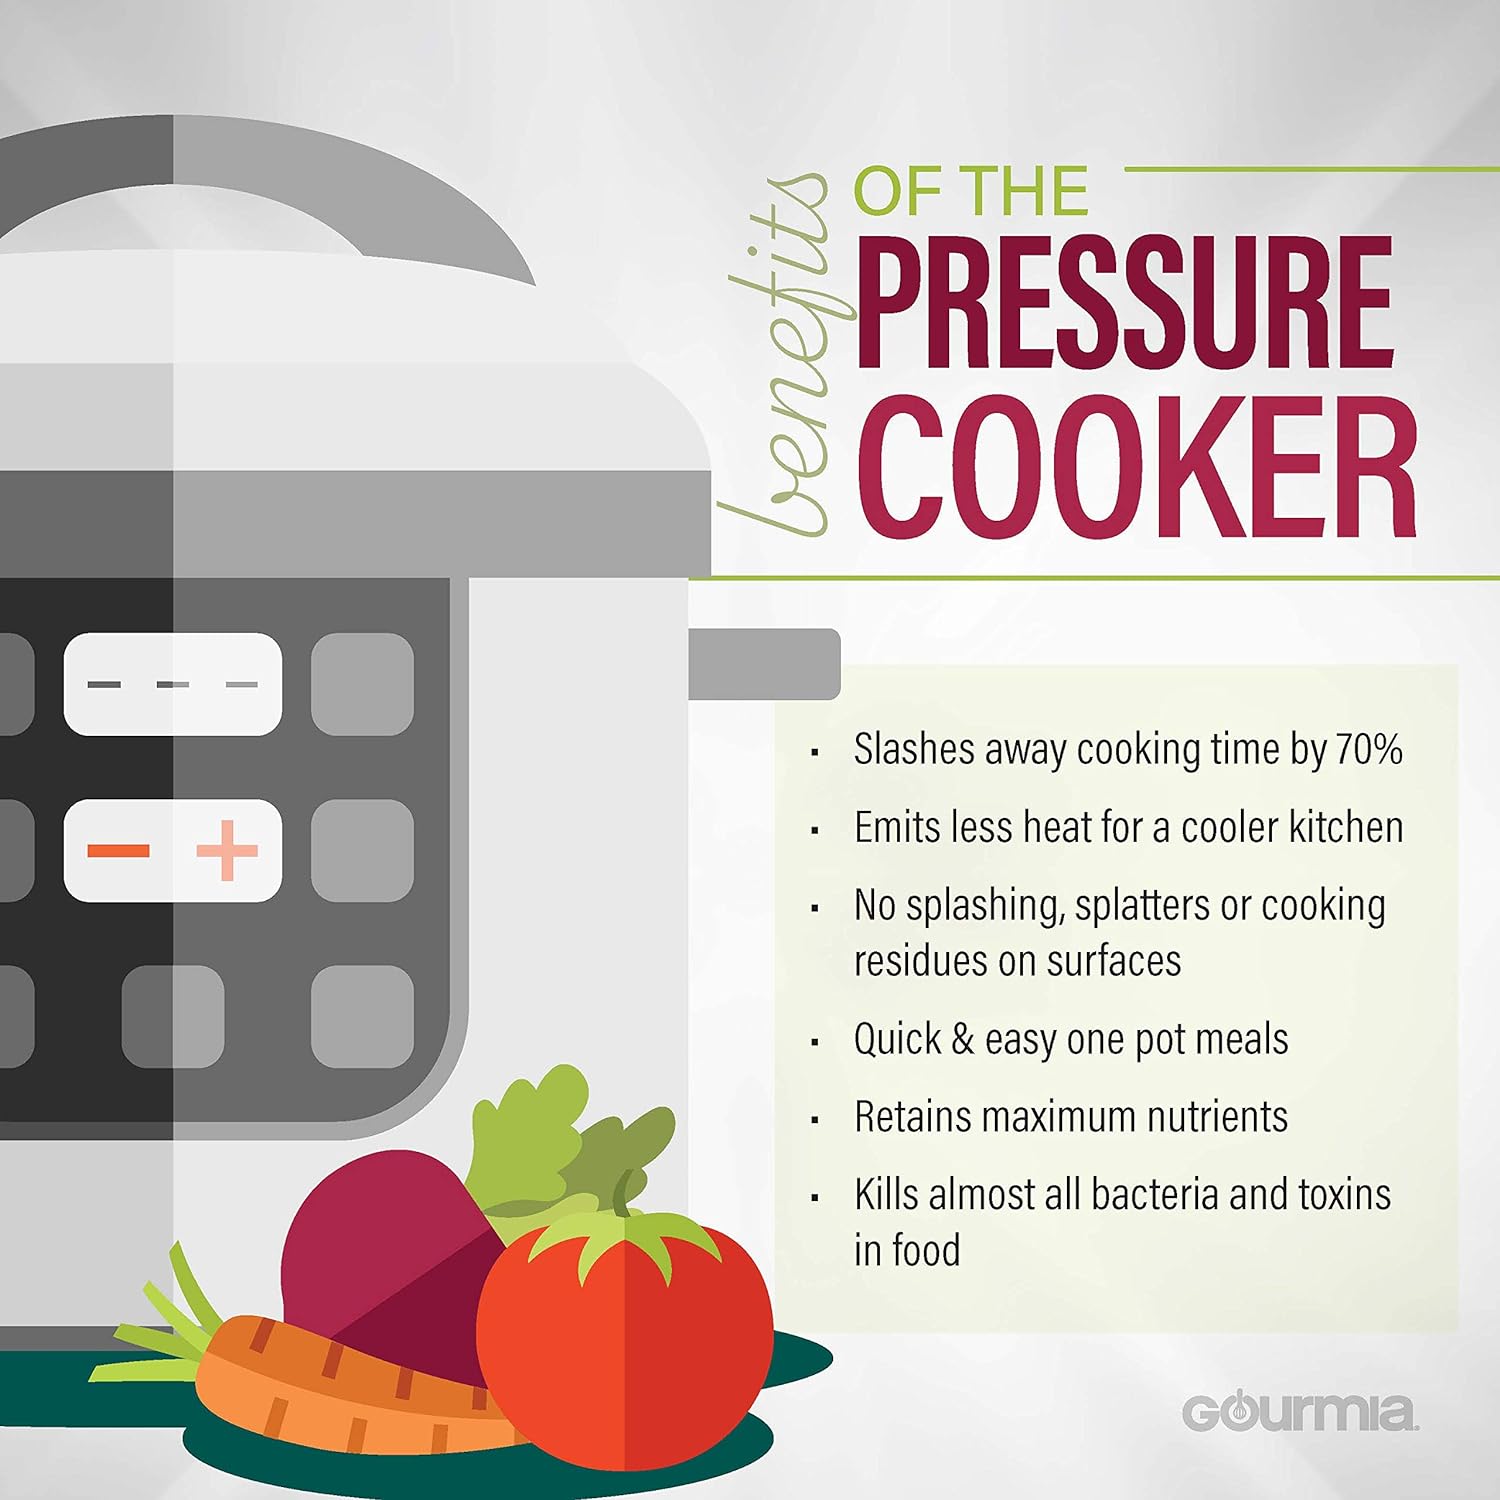 Gourmia GPC965 Digital Multi-Functional Pressure Cooker-Automatic Pressure Release-Adjustable Control-13 Cook Modes-Removable Stainless Steel 6Qt Pot-Lid Lock-Auto Stir Function,Silver & Black